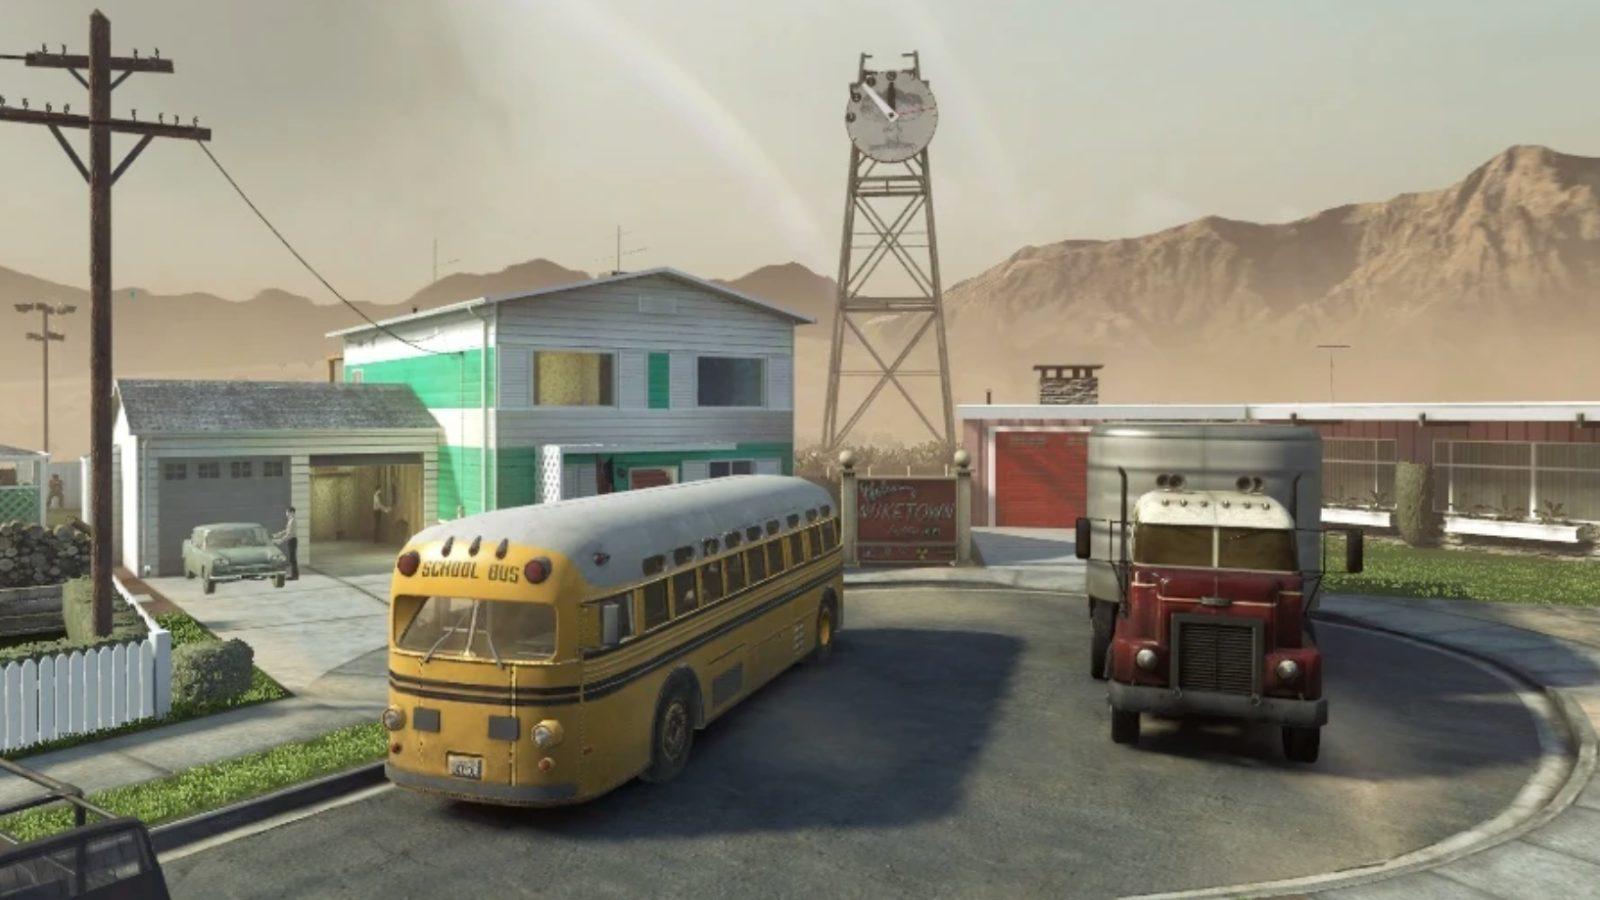 Call of Duty classic map Nuketown.